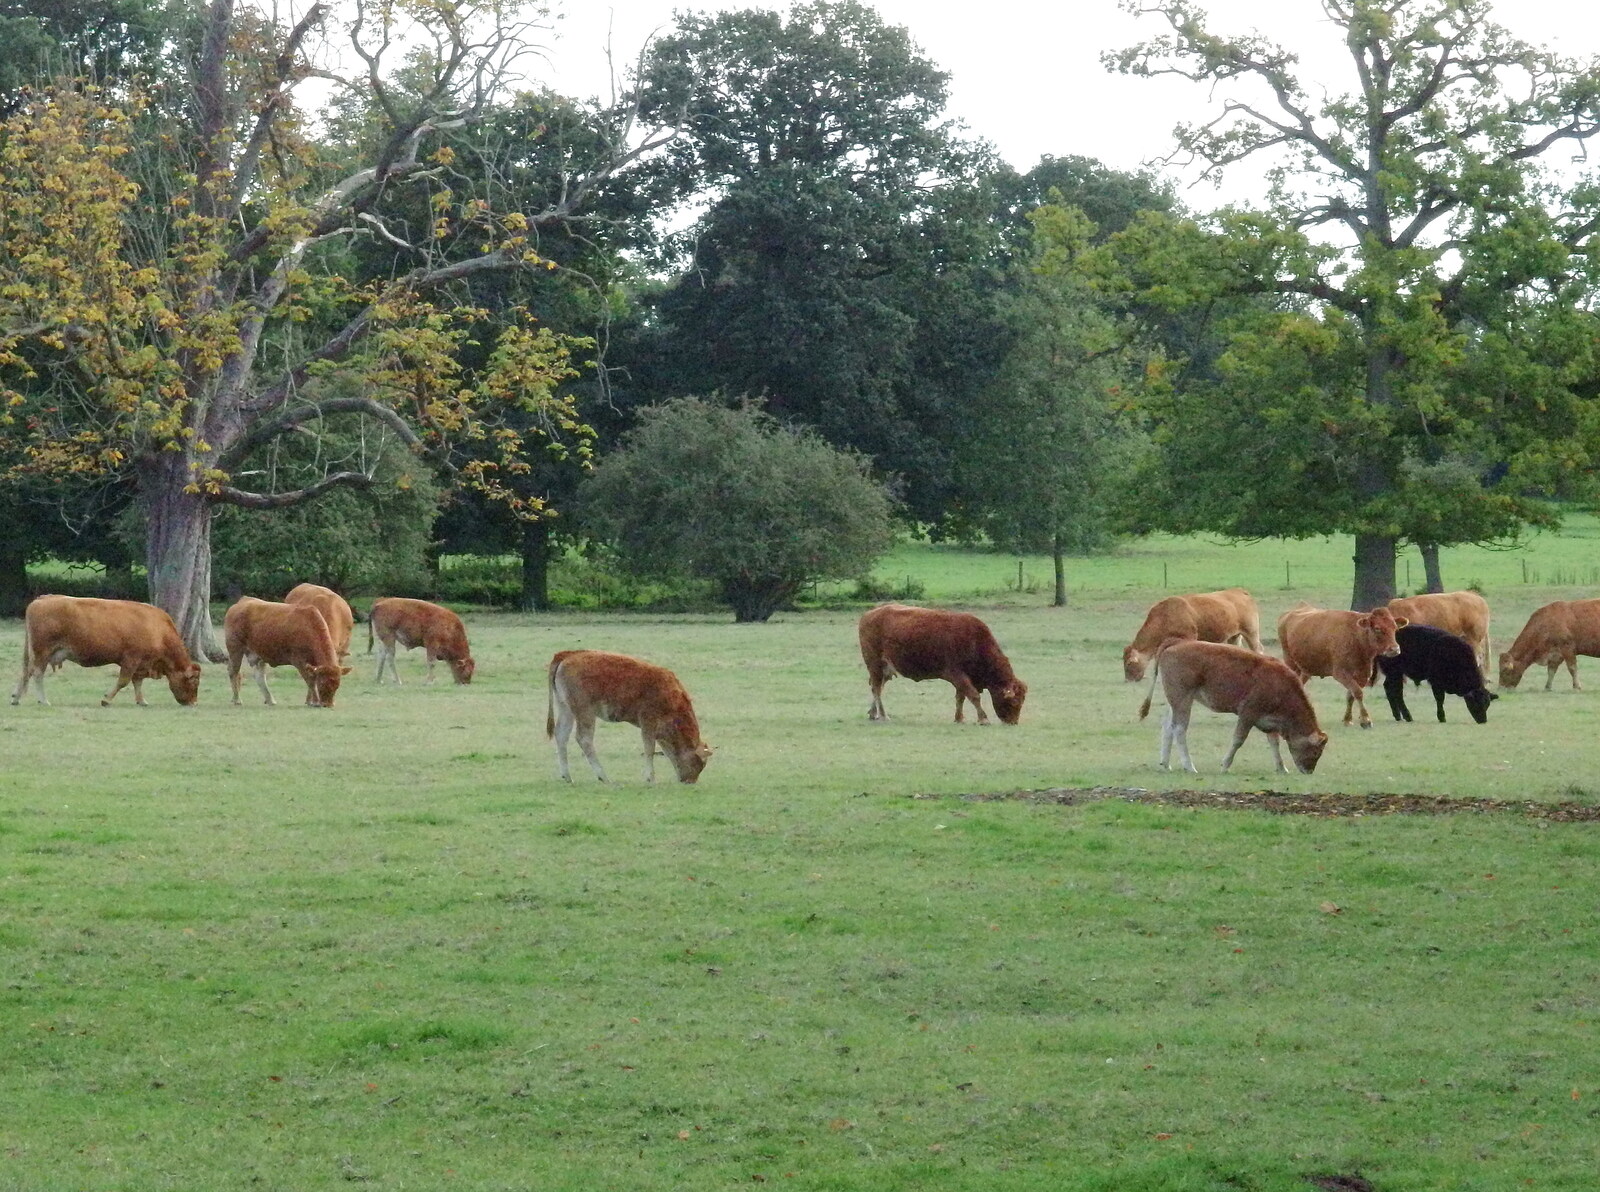 A pastoral scene of cows from A Walk Around Thornham, and Jacqui Dankworth, Bungay, Suffolk - 6th October 2013